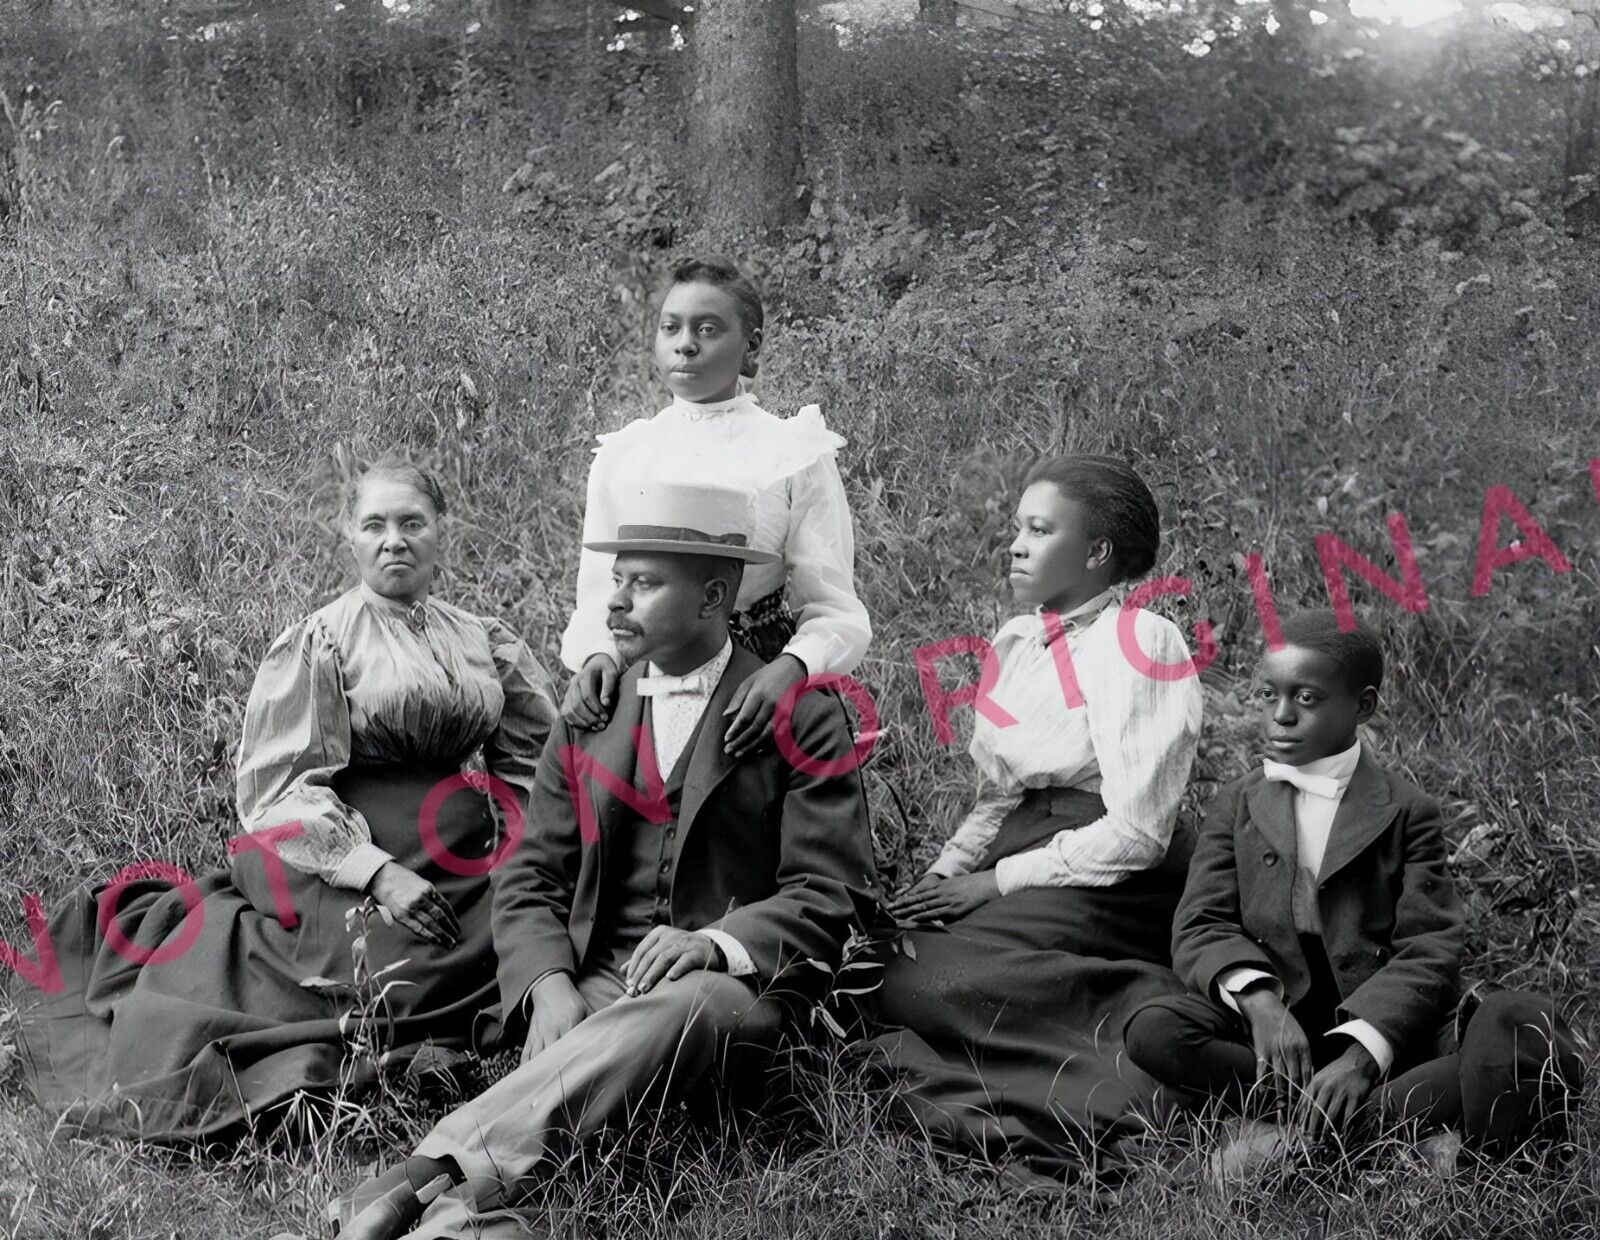 8x10 Vintage Photo Reprint of Wealthy African American Black Family c. 1900